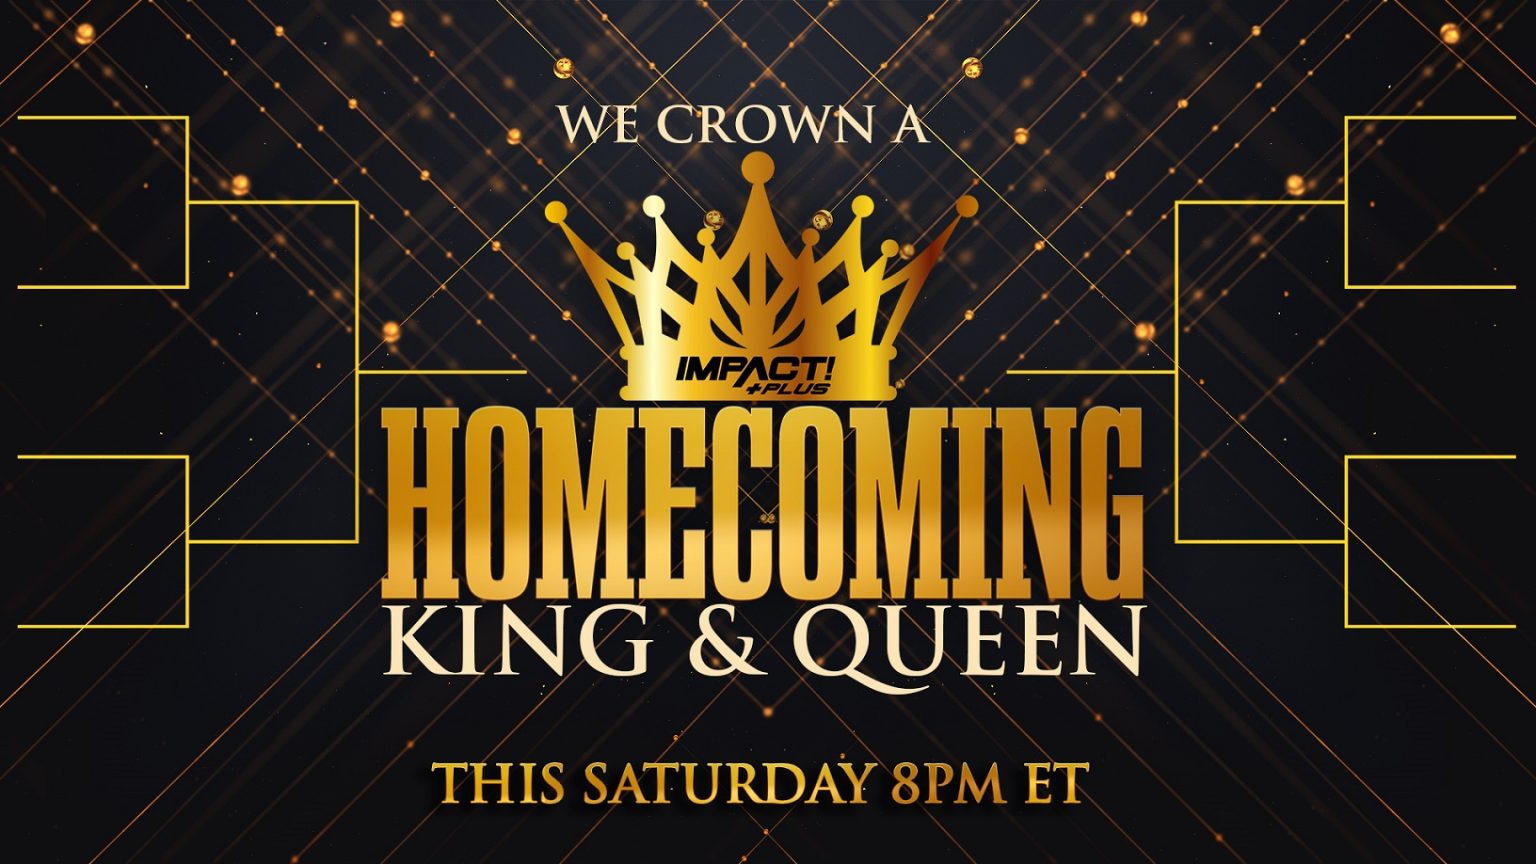 Crown-a-King-and-Queen-1536x864.jpg